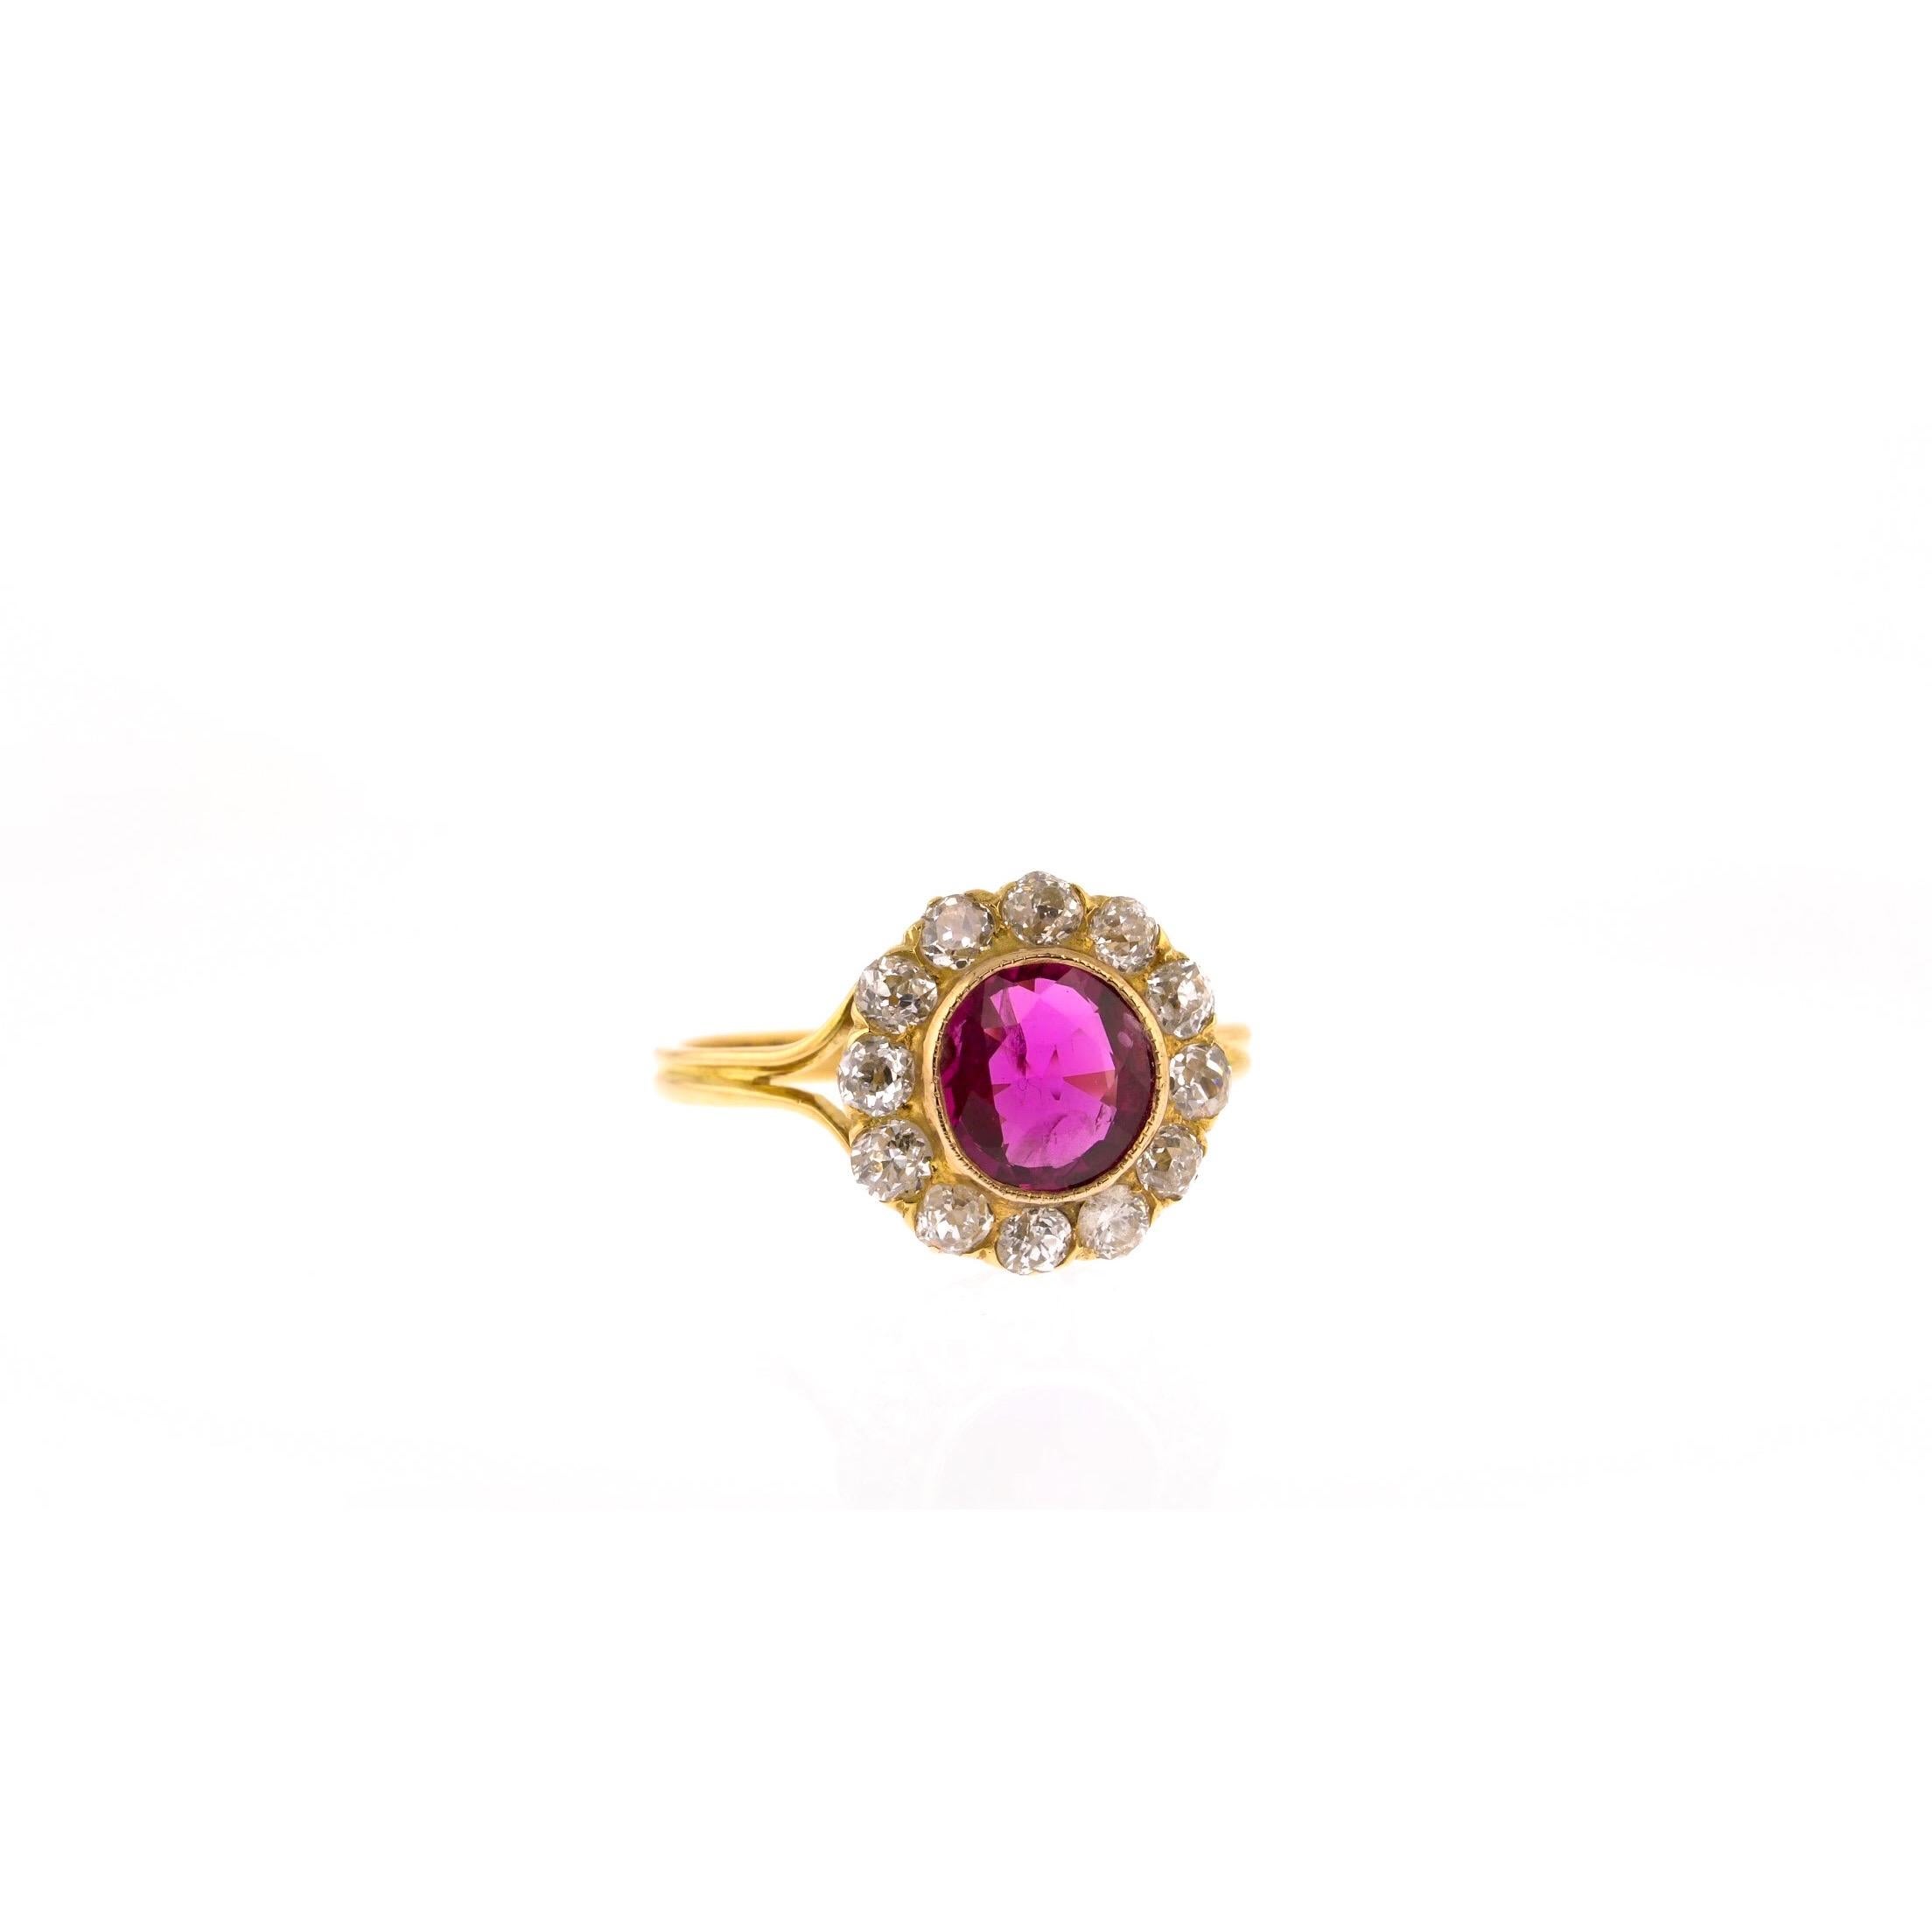 This vibrant yellow gold ring will add colour to any occasion. At its centre is a beautiful oval ruby with red overtones and deep, pink-purple undertones. Its warmth is complemented by 12 round diamonds, arranged around the ruby in a pretty vintage